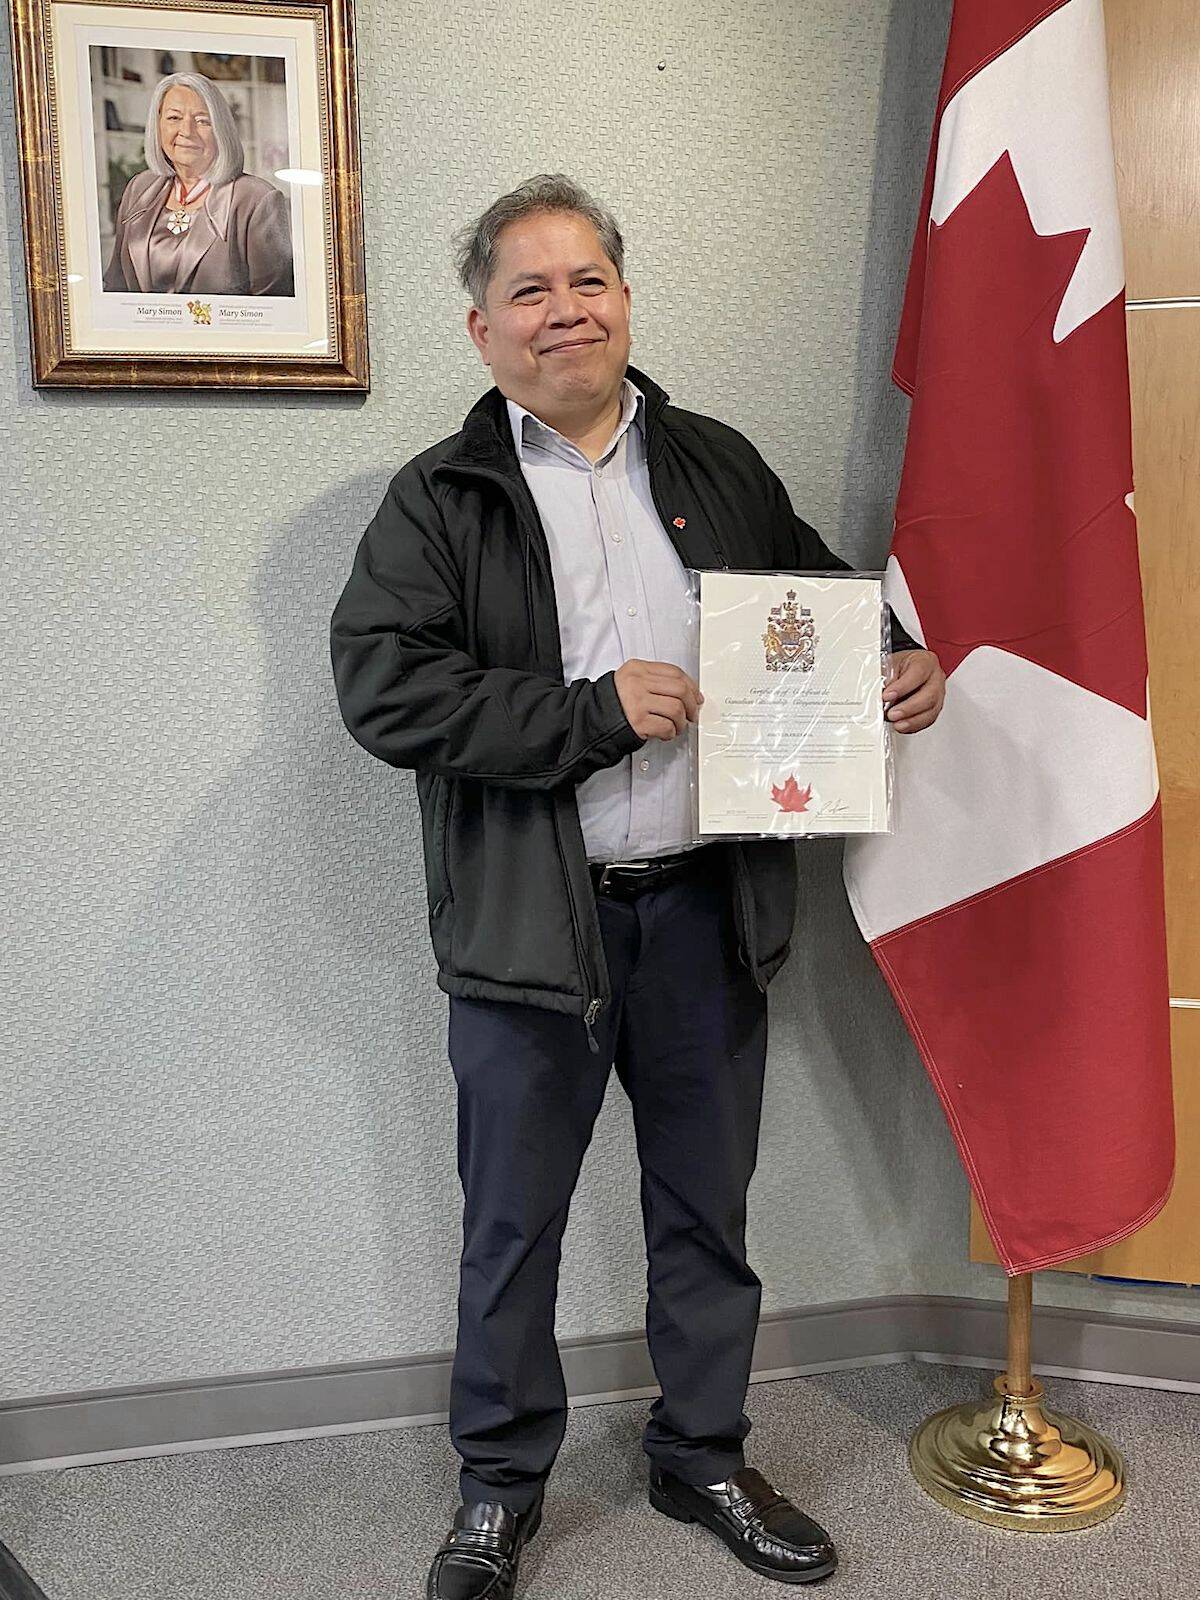 A proud José Figueroa displayed his certificate on Oct. 19, the day he became a Canadian citizen, ending a 13-year-battle to remain in his adopted country that saw the Langley City resident seek sanctuary in a Walnut Grove church. (Special to Langley Advance Times)